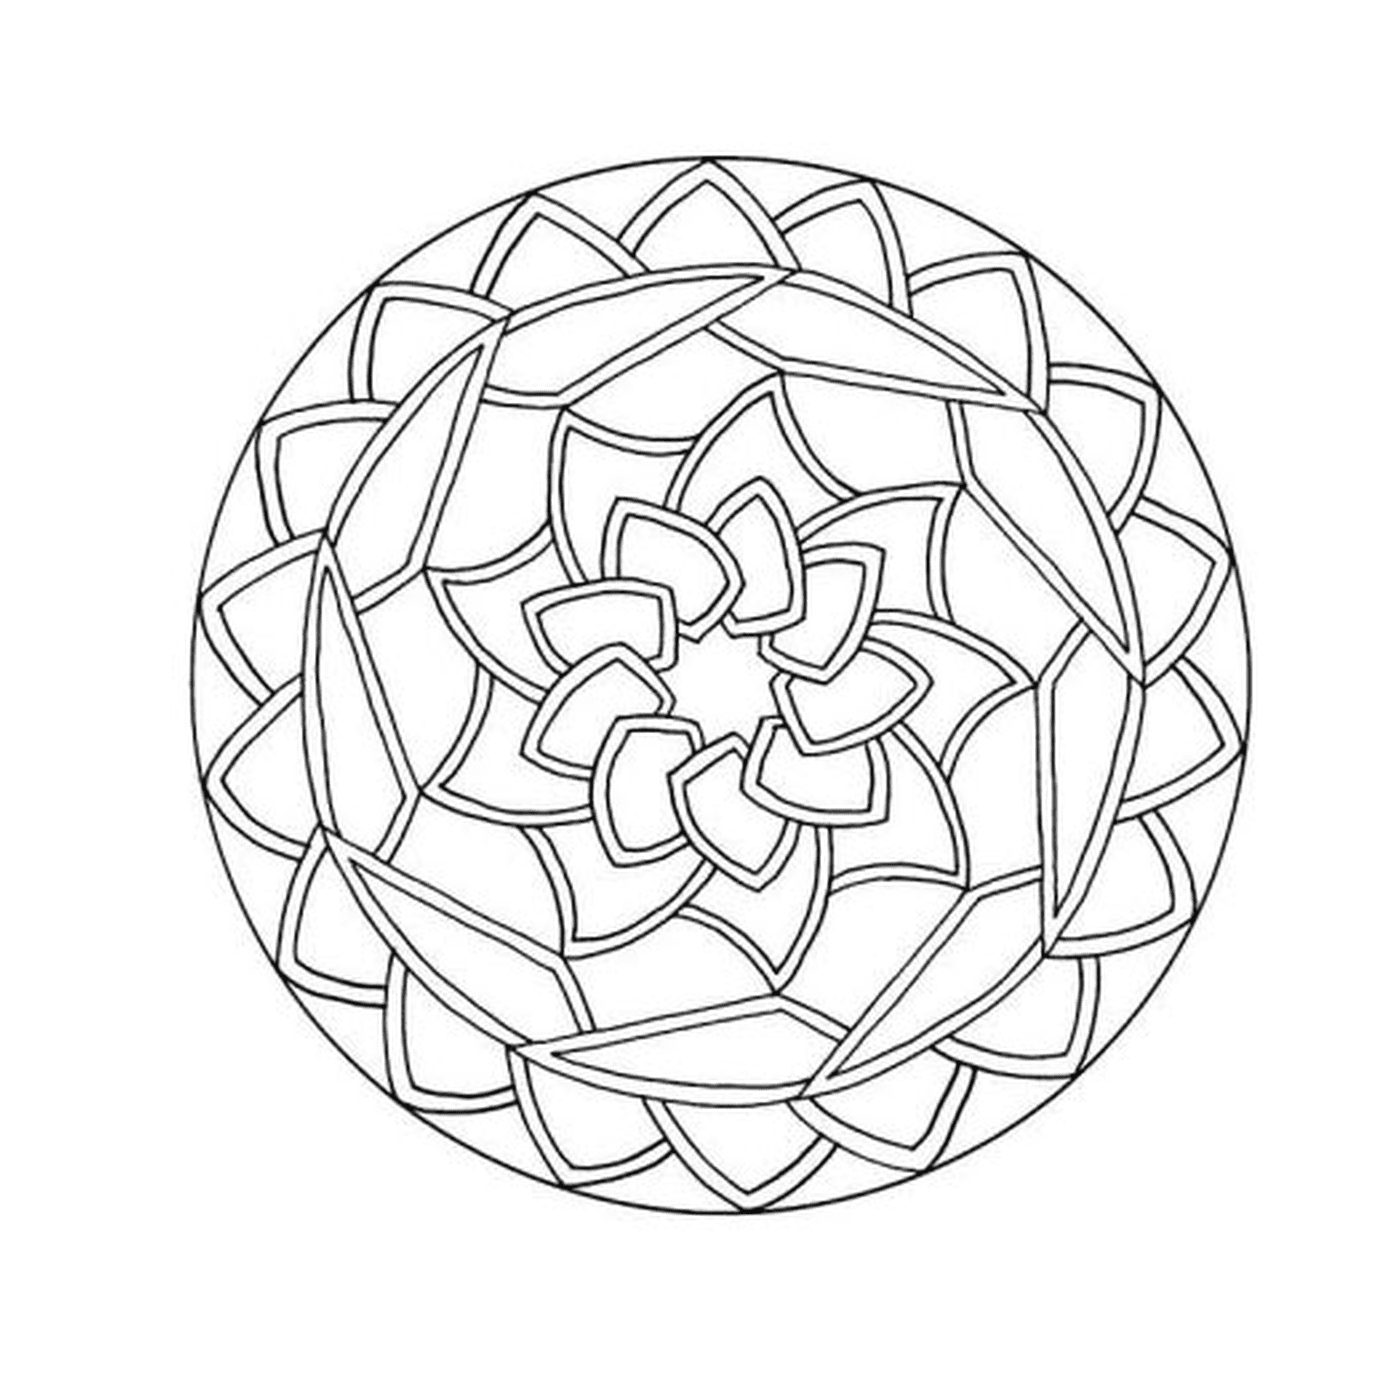  Japanese Mandala with central flower 